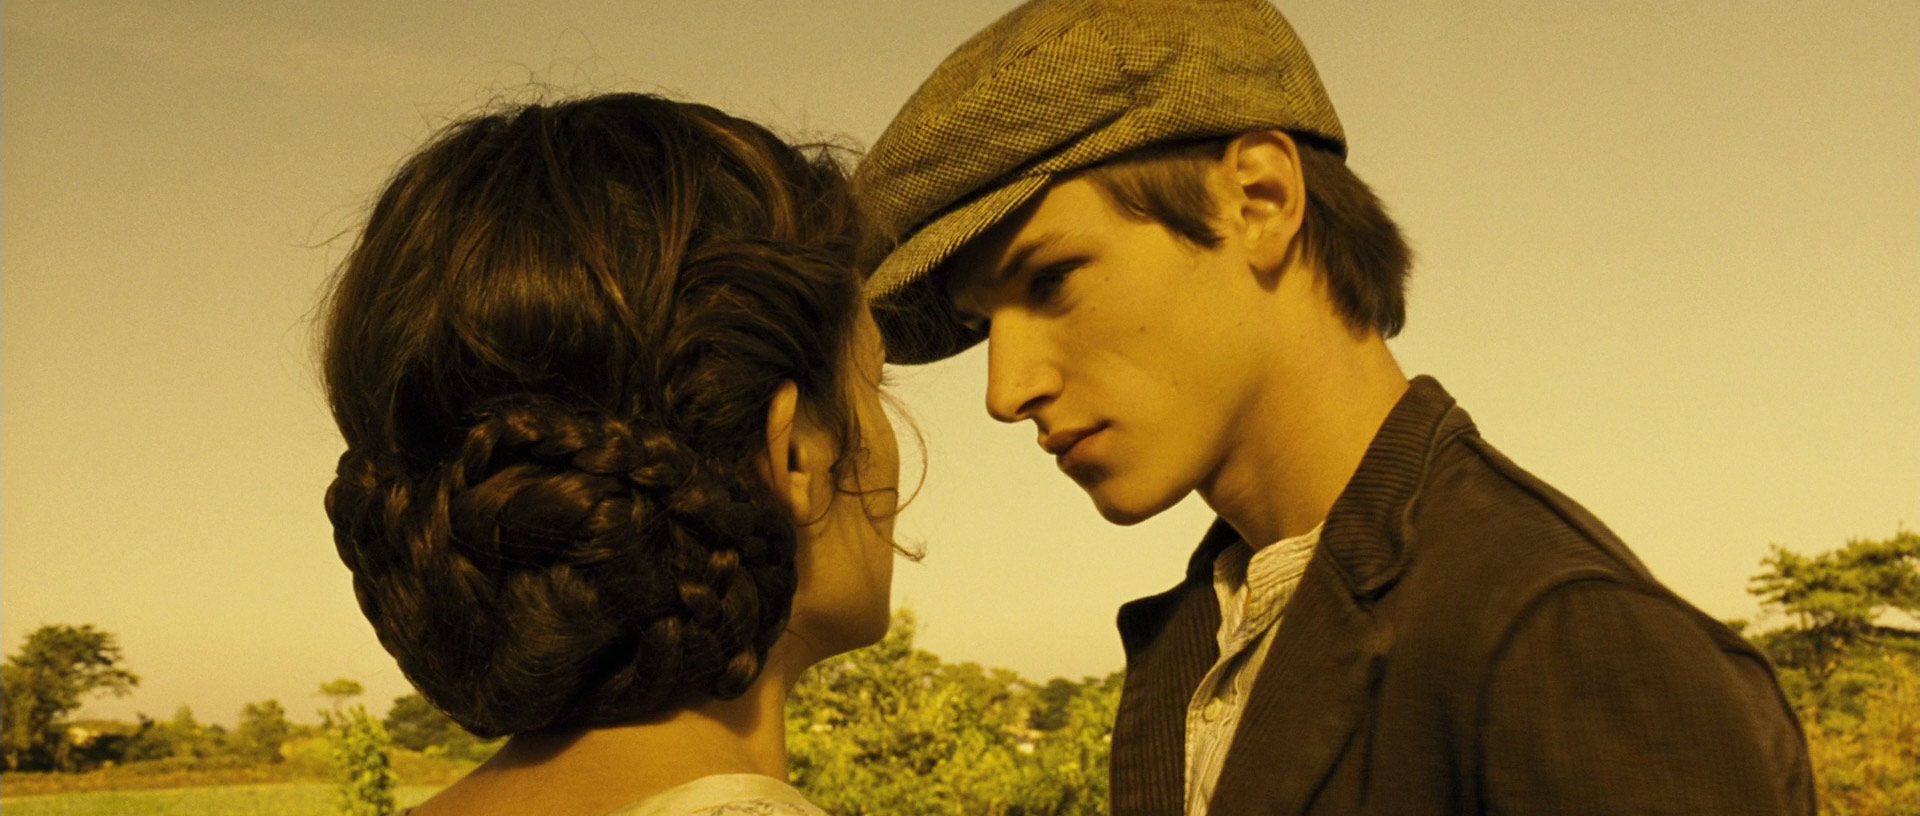 Gaspard Ulliel in A Very Long Engagement